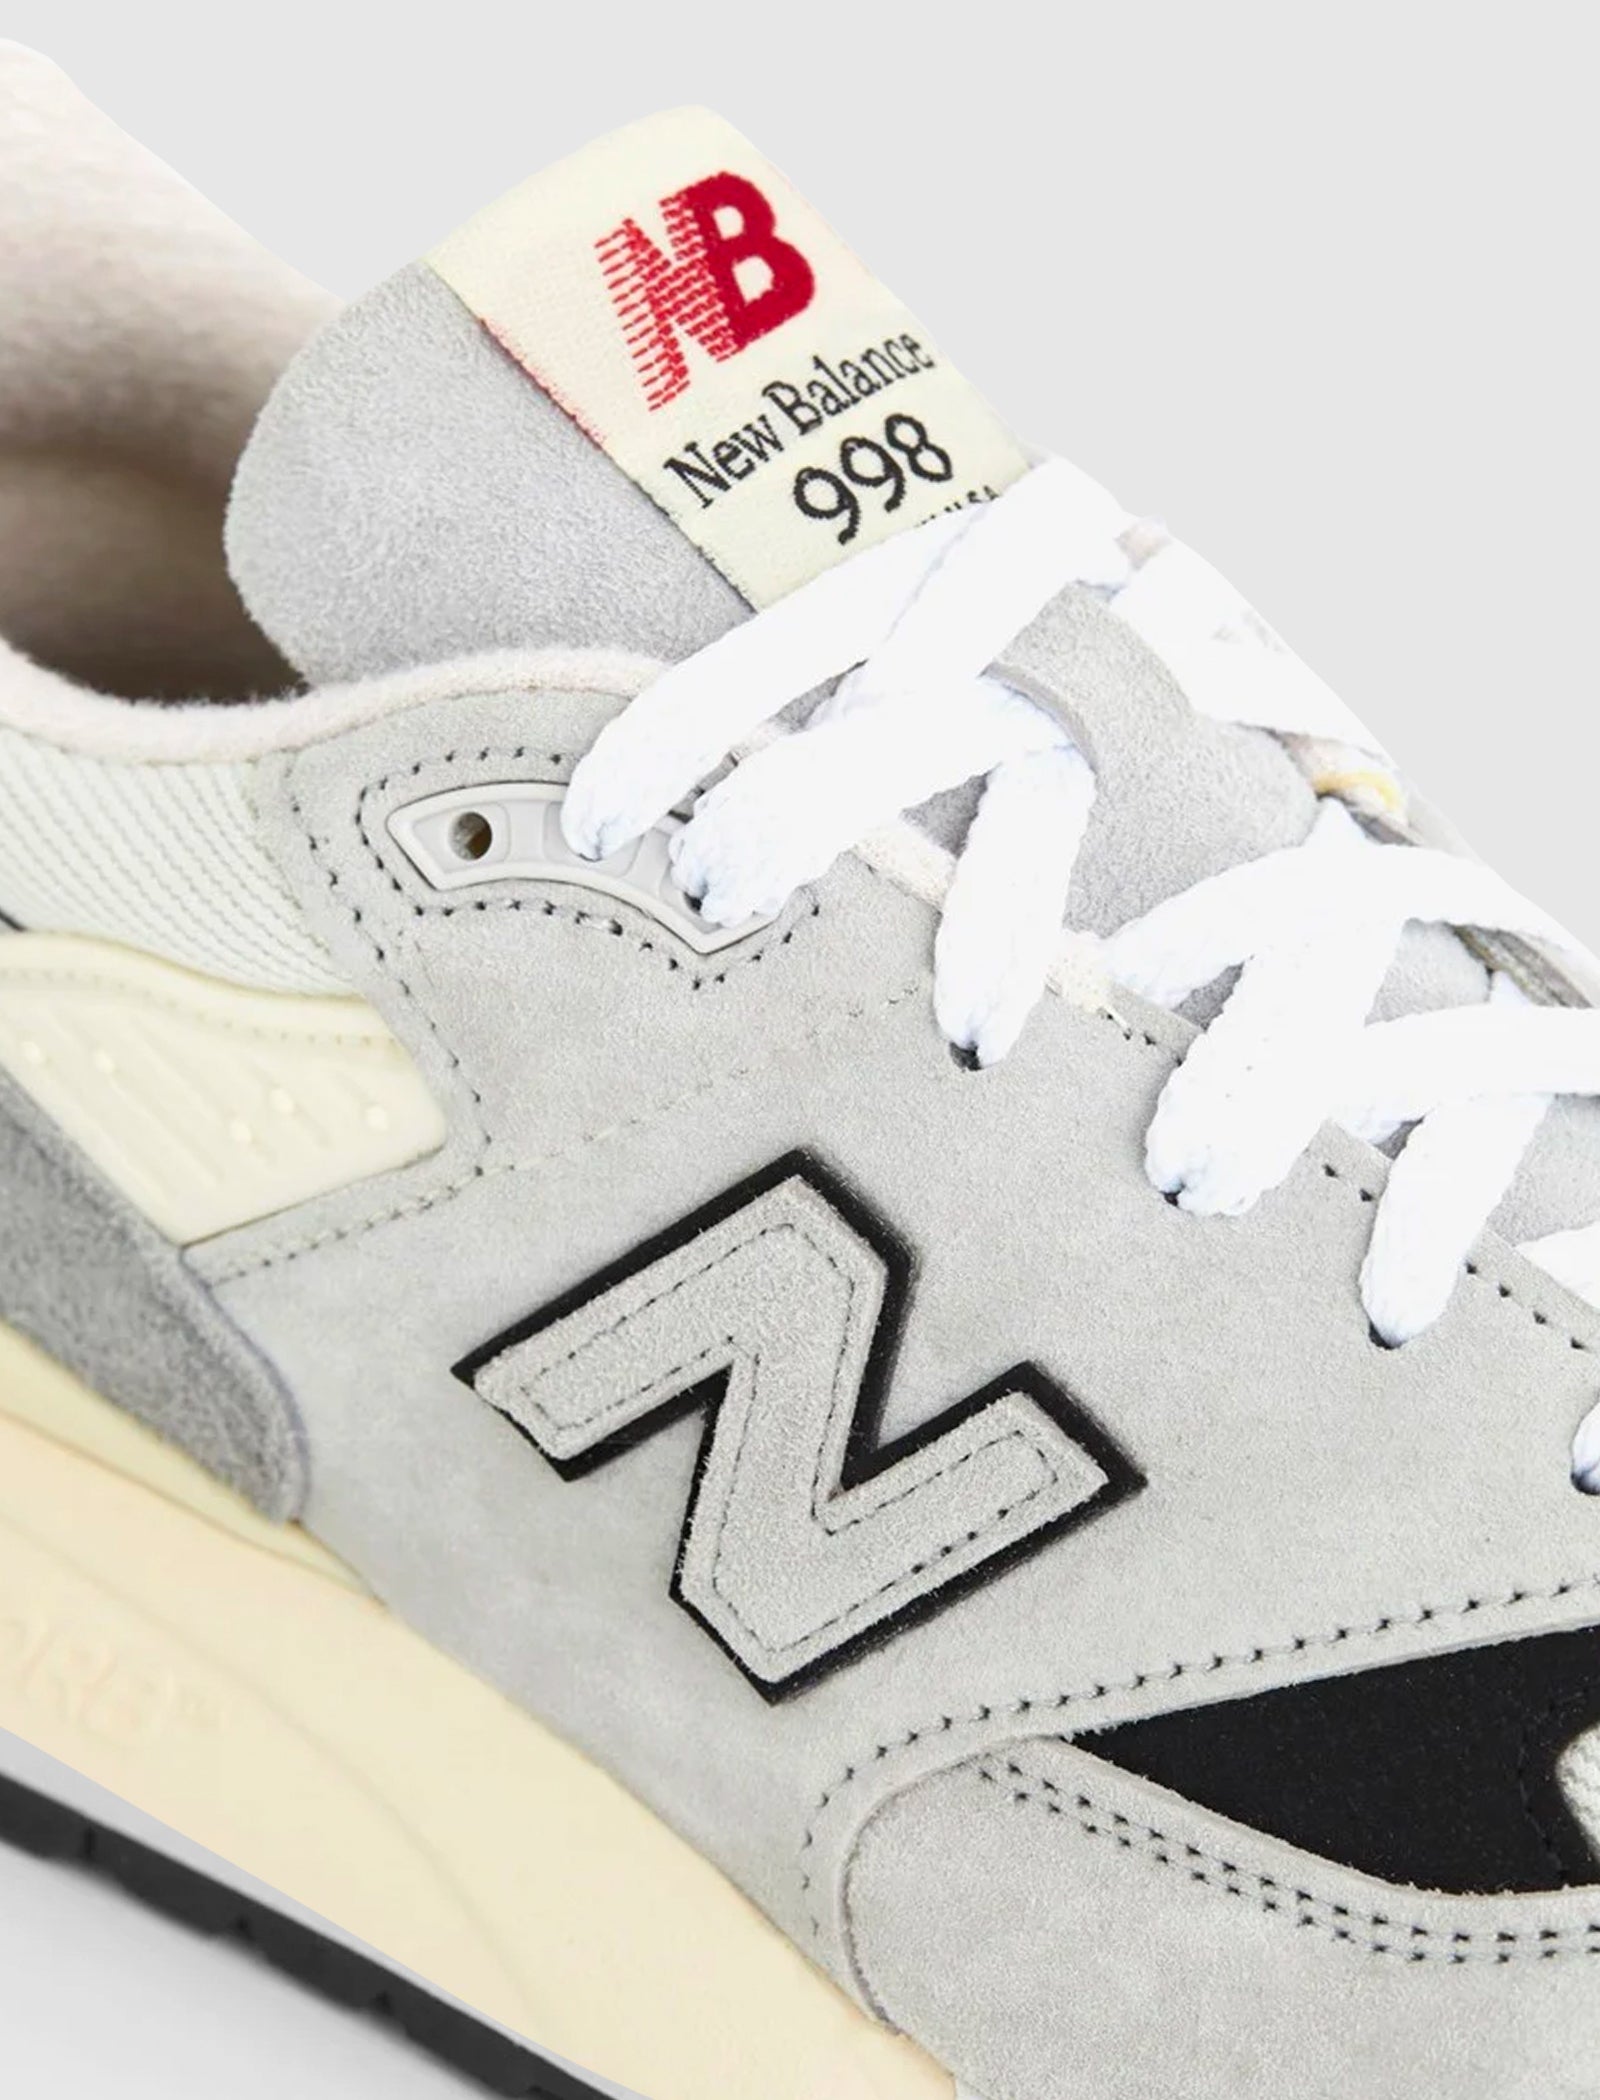 998 MADE IN USA "GREY"